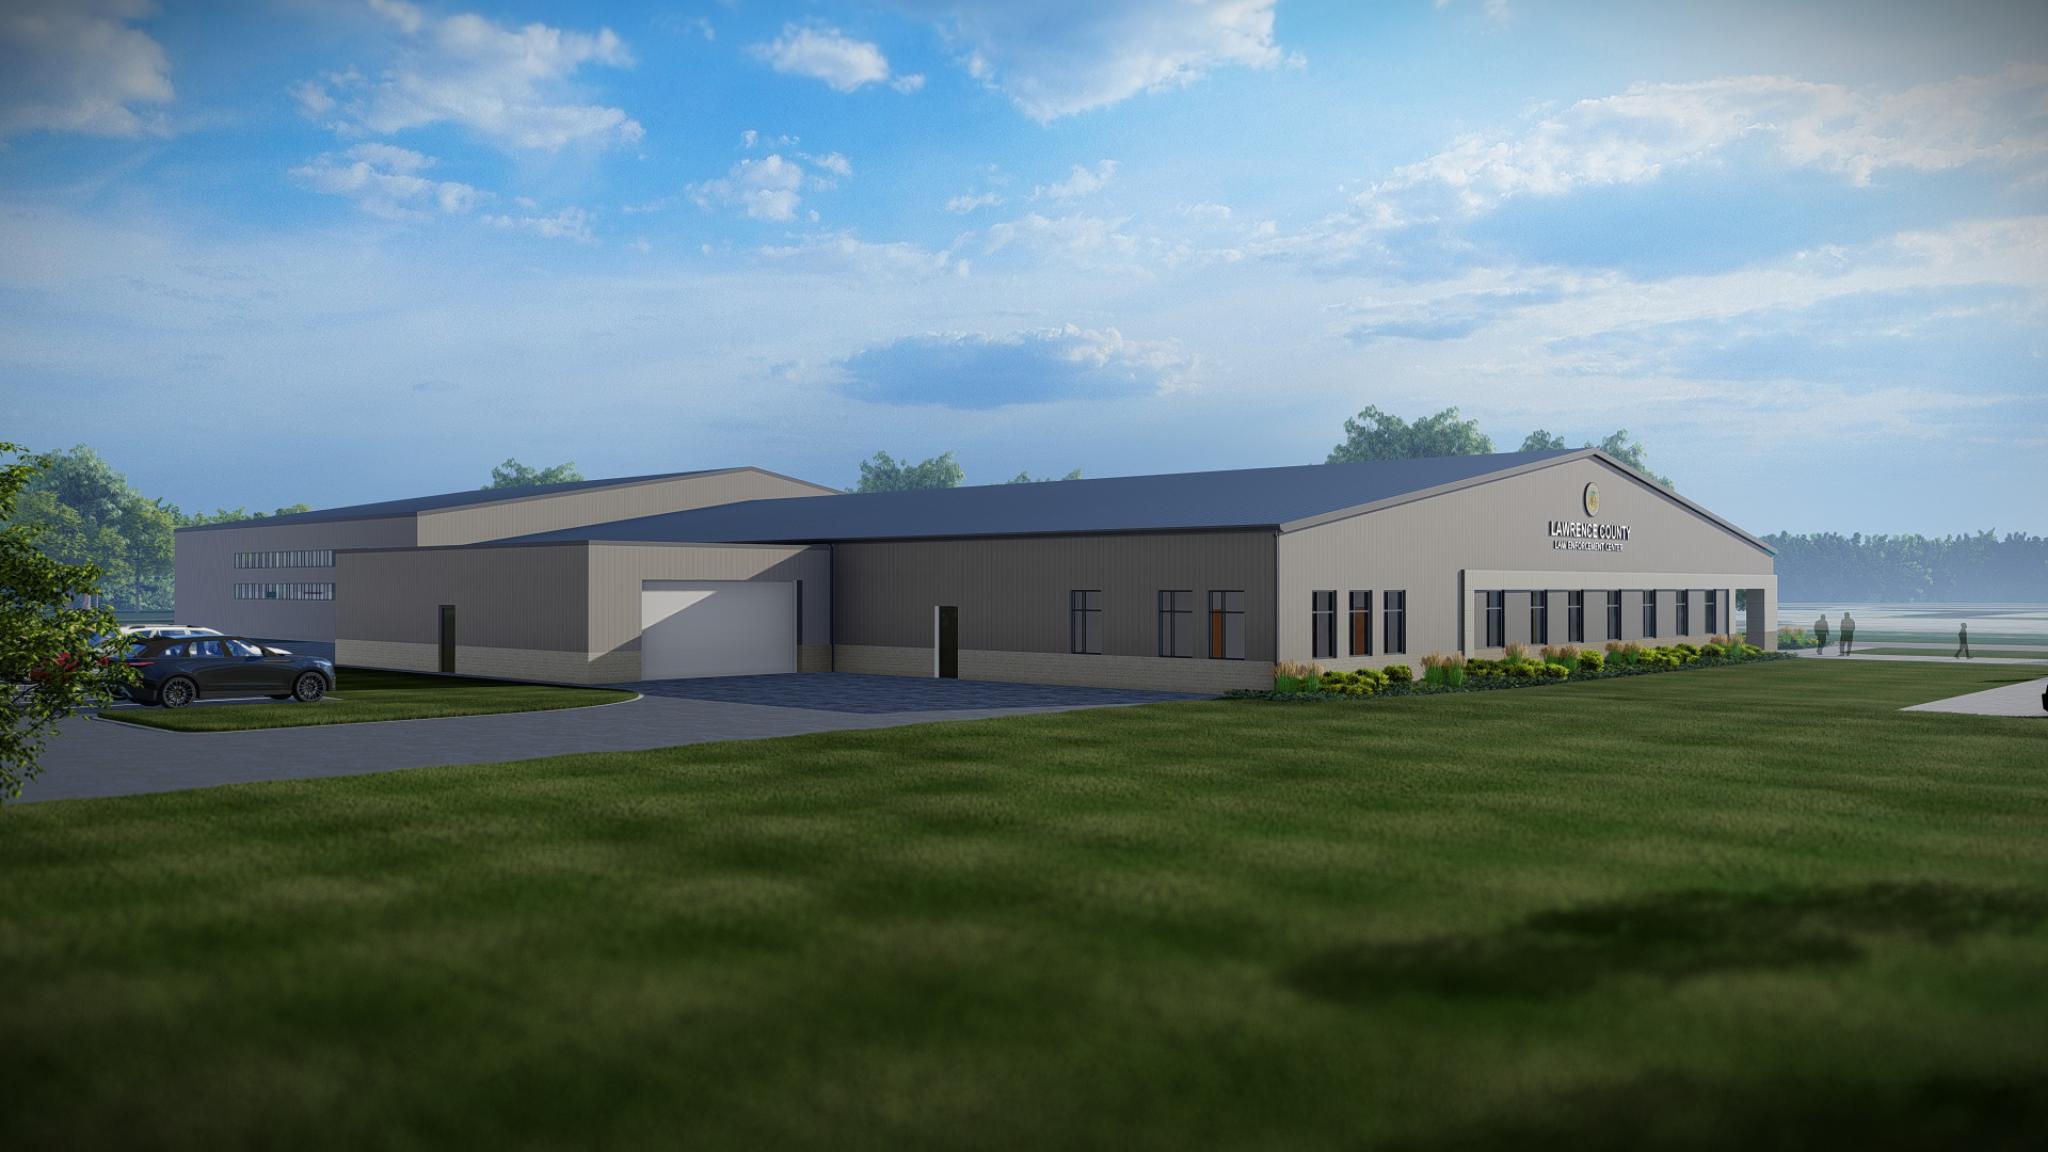 Rendering of Lawrence County (Missouri) Law Enforcement Center